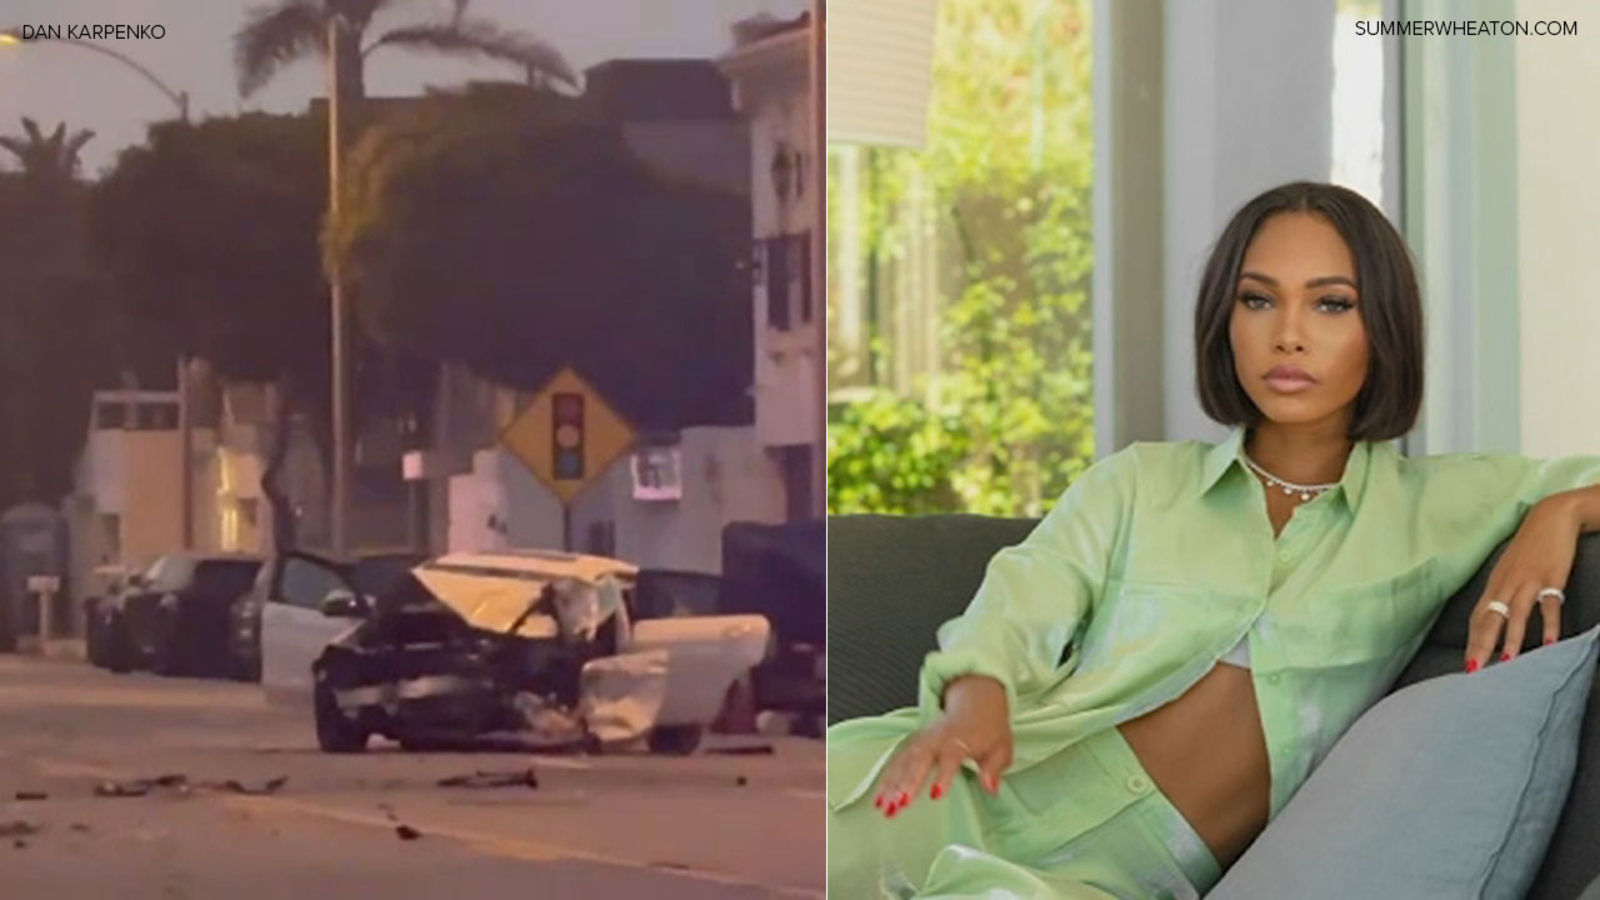 Social media influencer Summer Wheaton involved in fatal Malibu crash on PCH, officials say [Video]